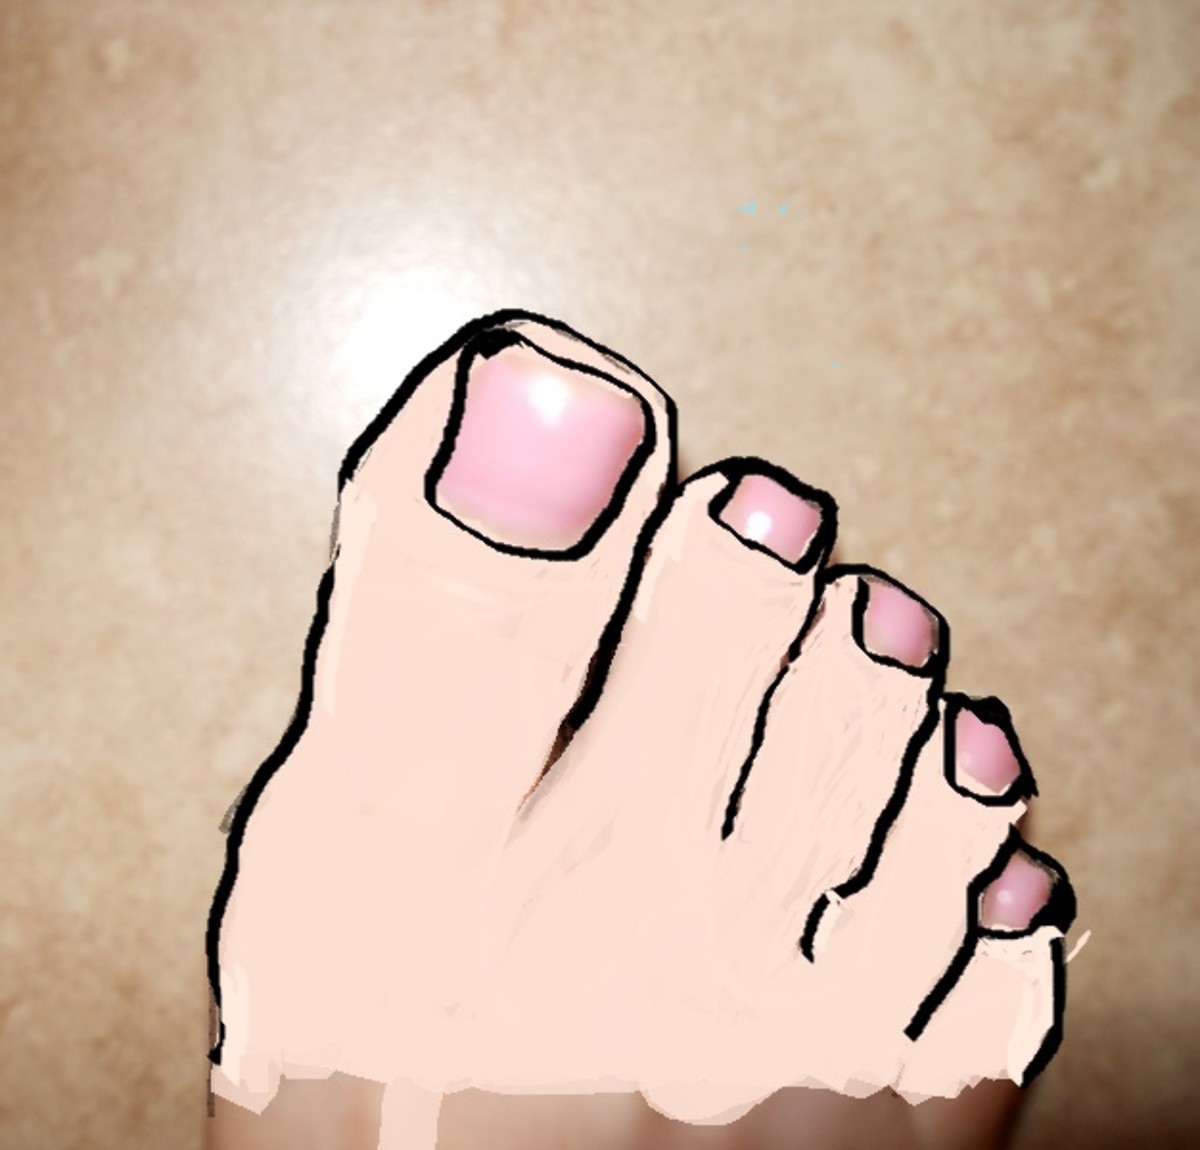 Big Toe Pain With a Surprising Diagnosis (and Easy Fix)